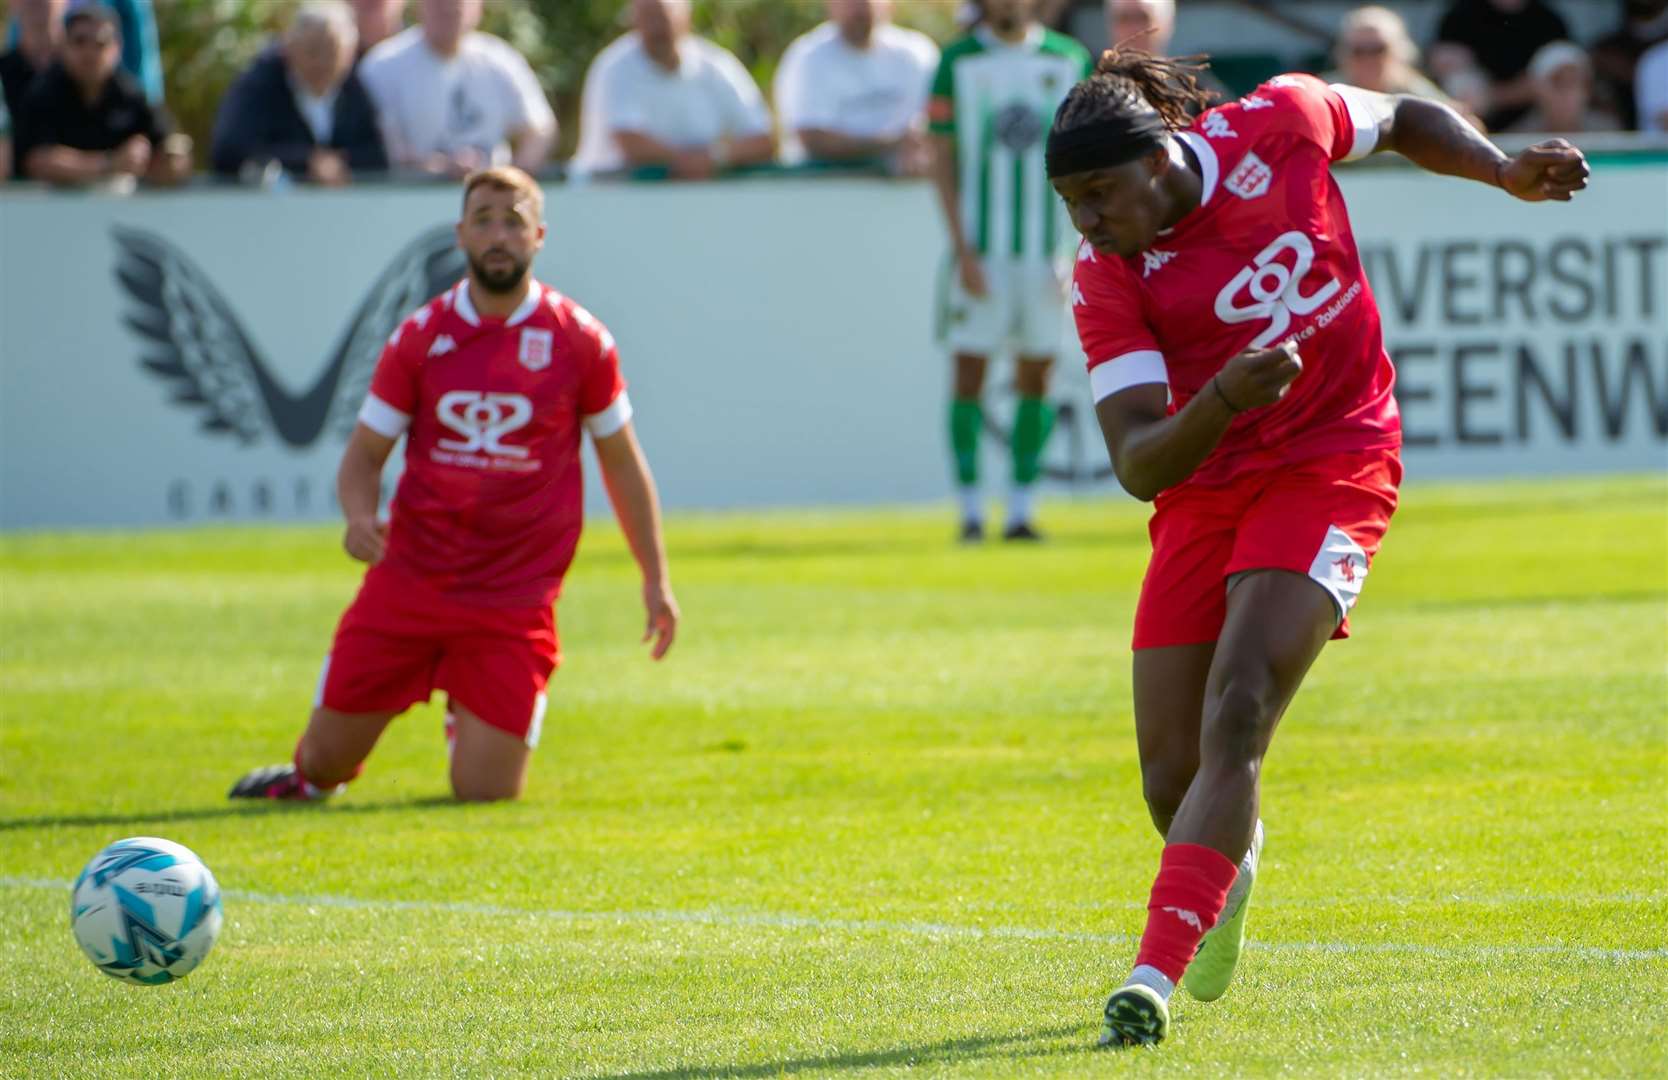 Jefferson Aibangbee, pictured scoring on the opening-day of the Southern Counties East Premier Division season, is on a season-long loan from Sheppey and therefore shouldn’t have played for the Lilywhites in the FA Vase. Picture: Ian Scammell